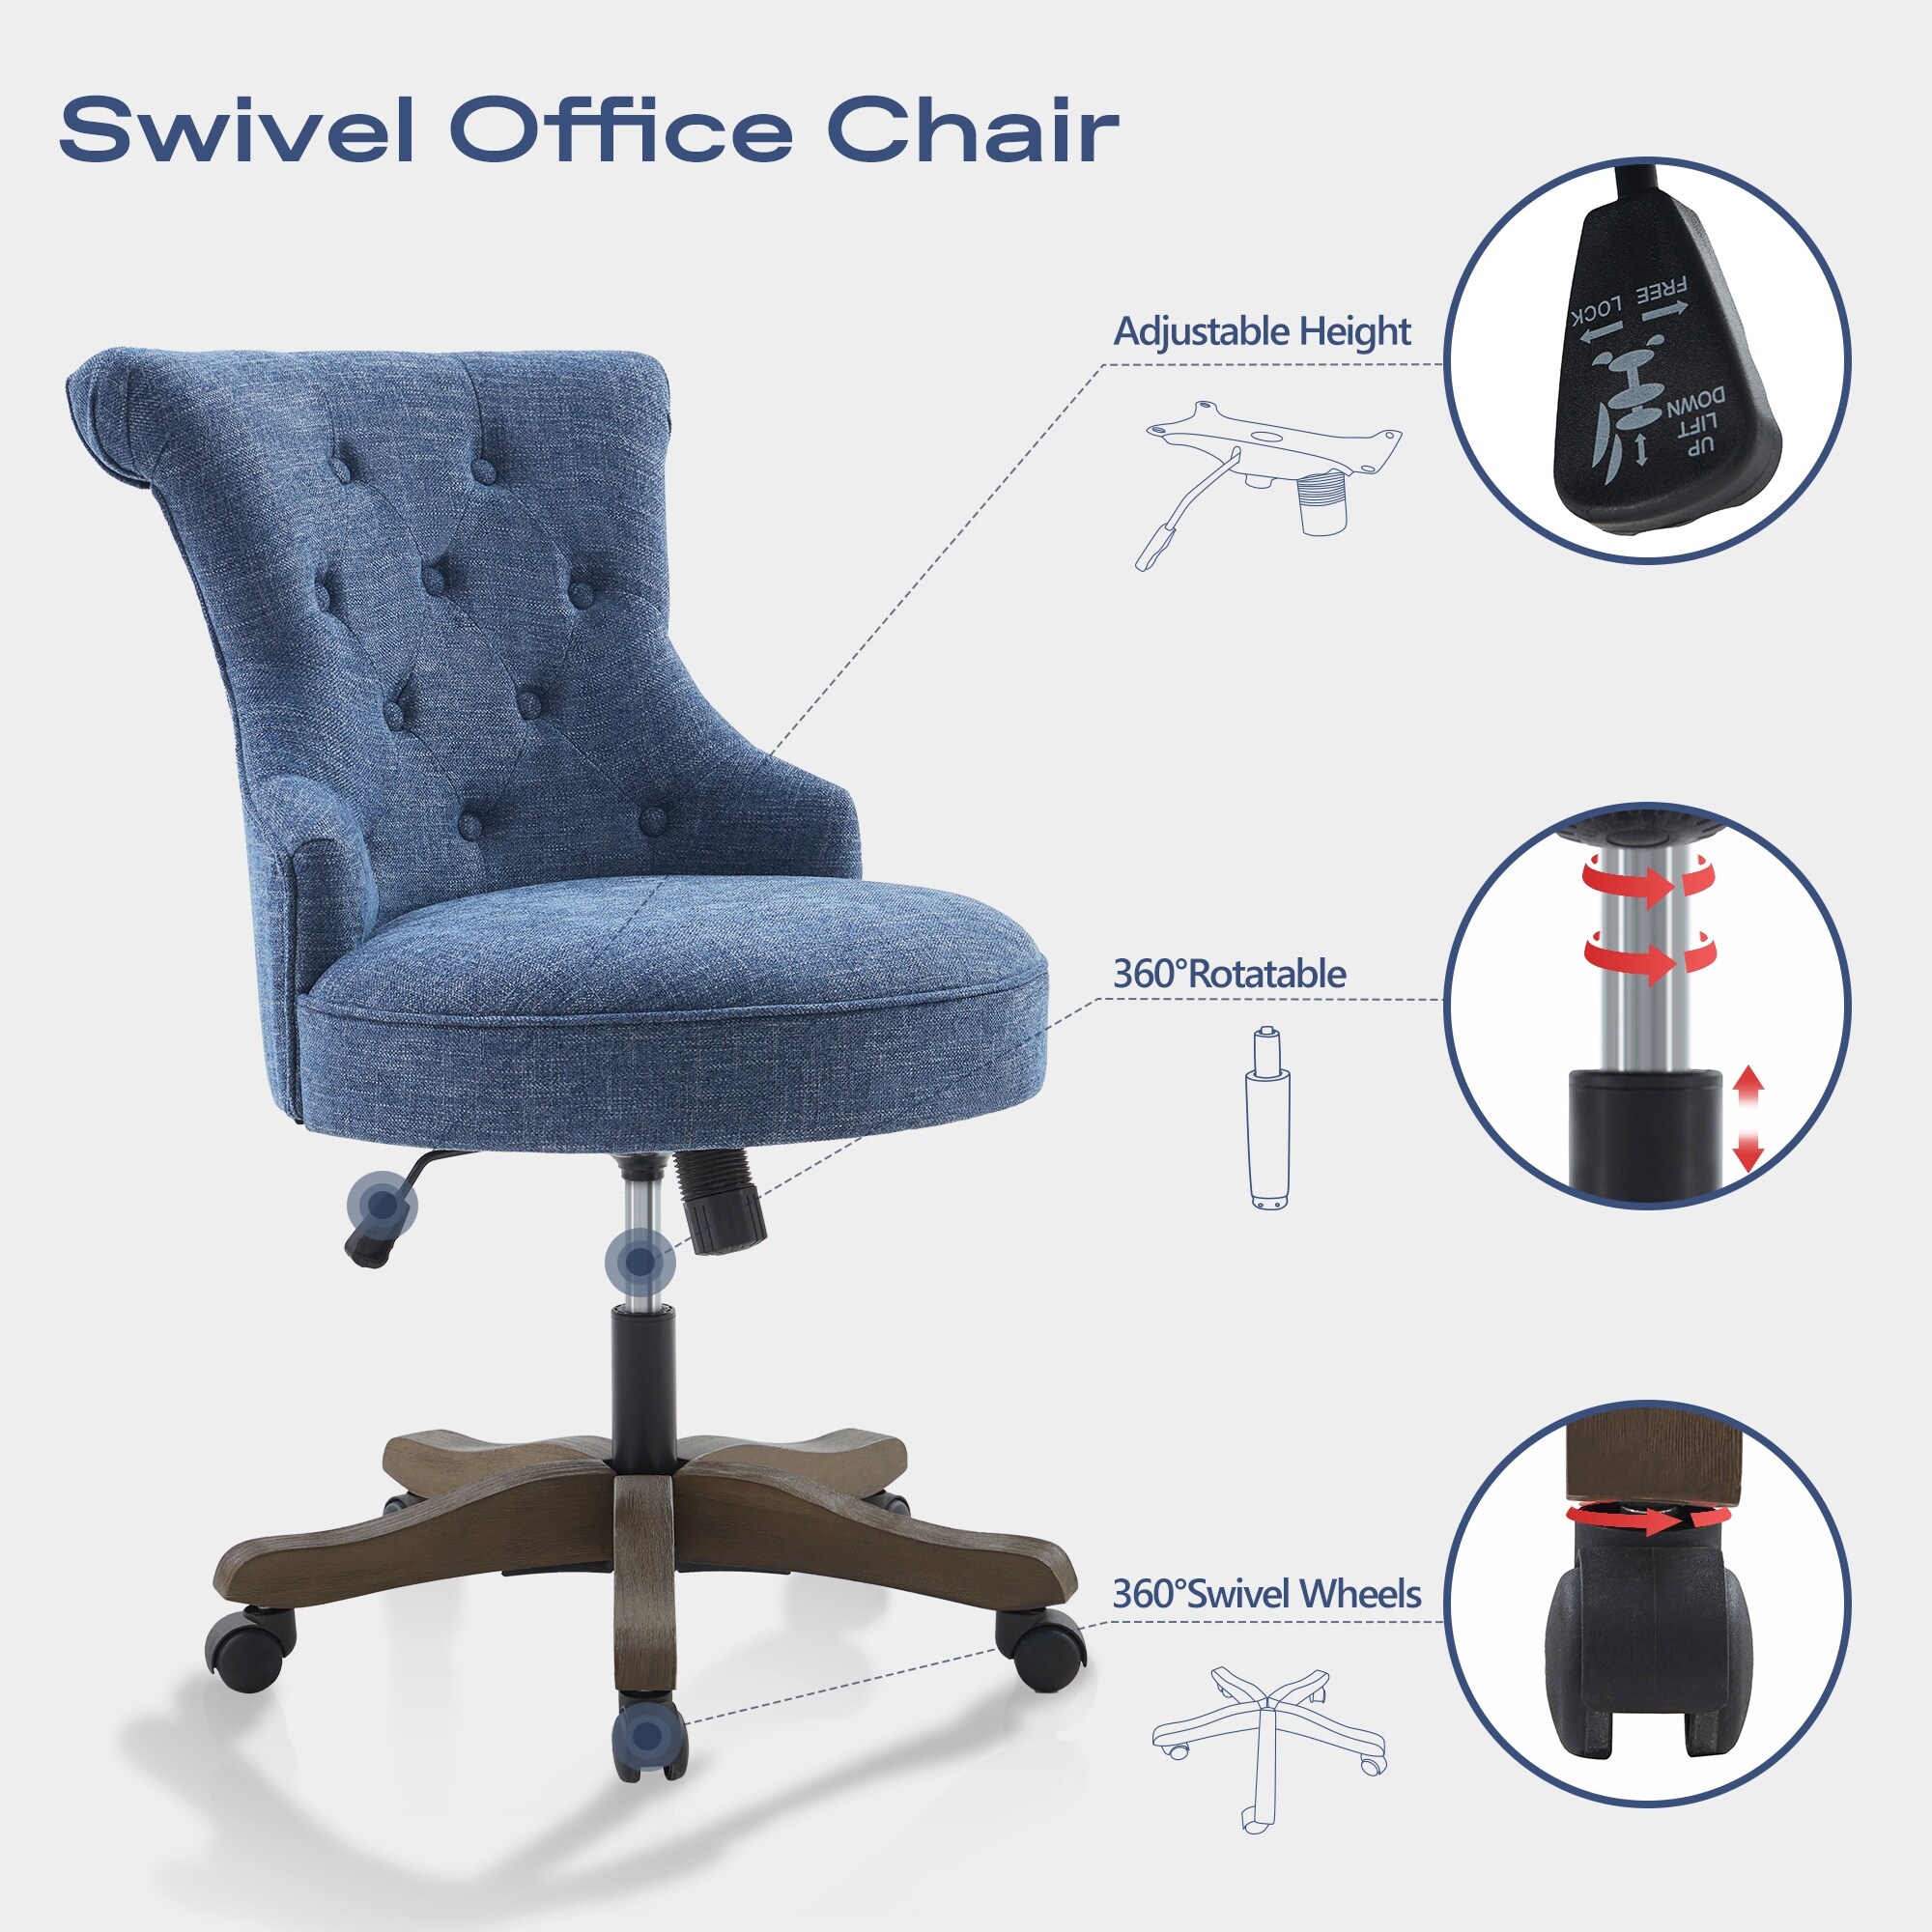 Upholstered Desk Chair, Office Seating